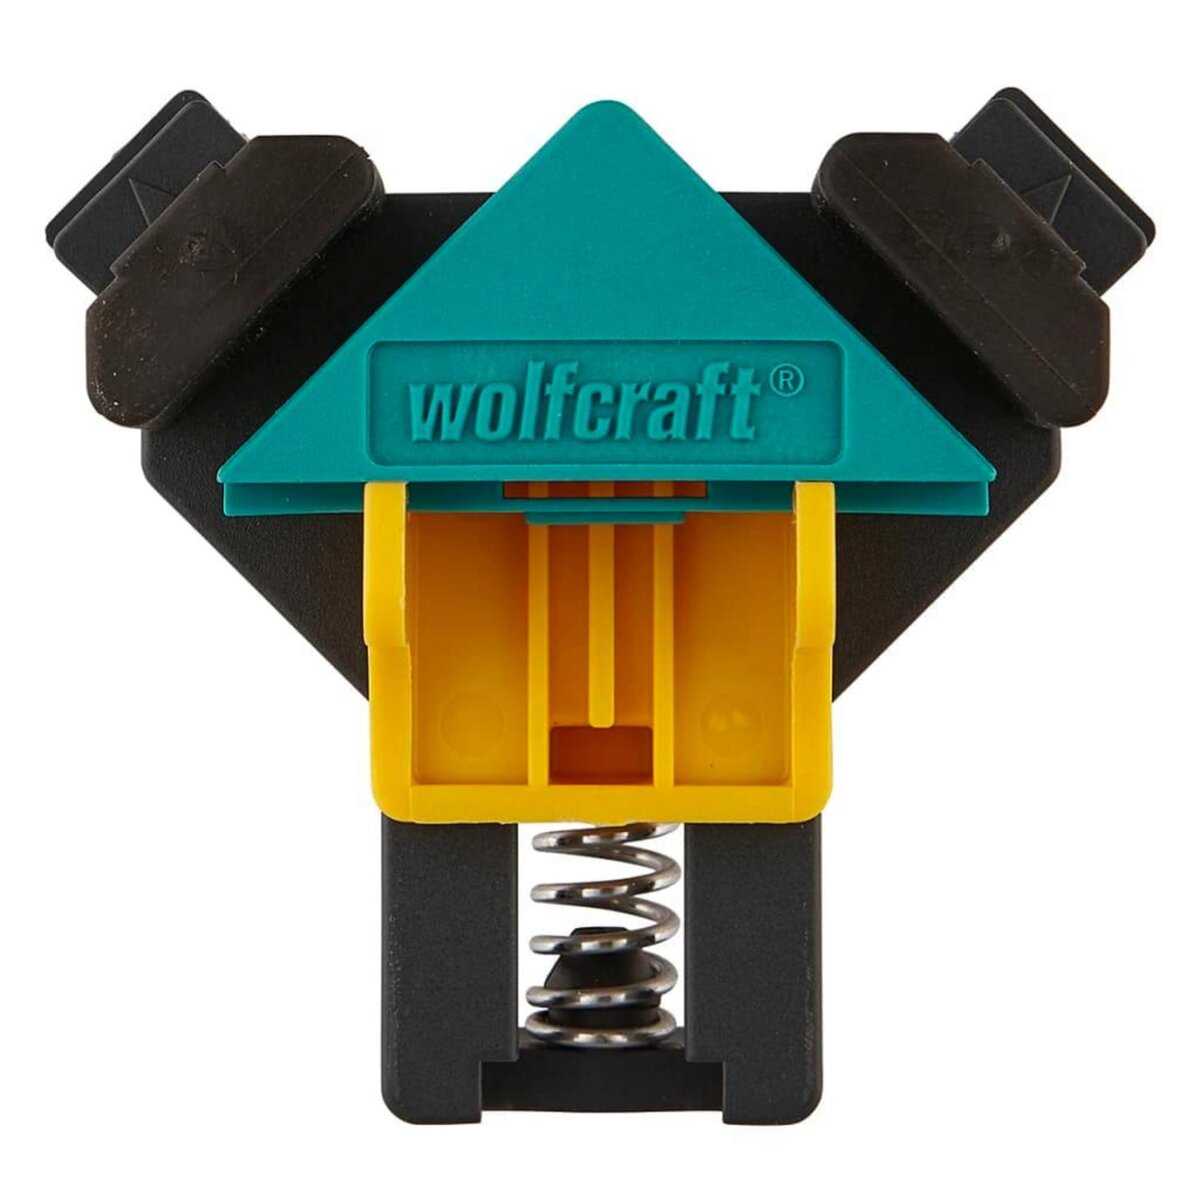 WOLFCRAFT wolfcraft Serre-joint angulaire 2 pcs ES 22 3051000